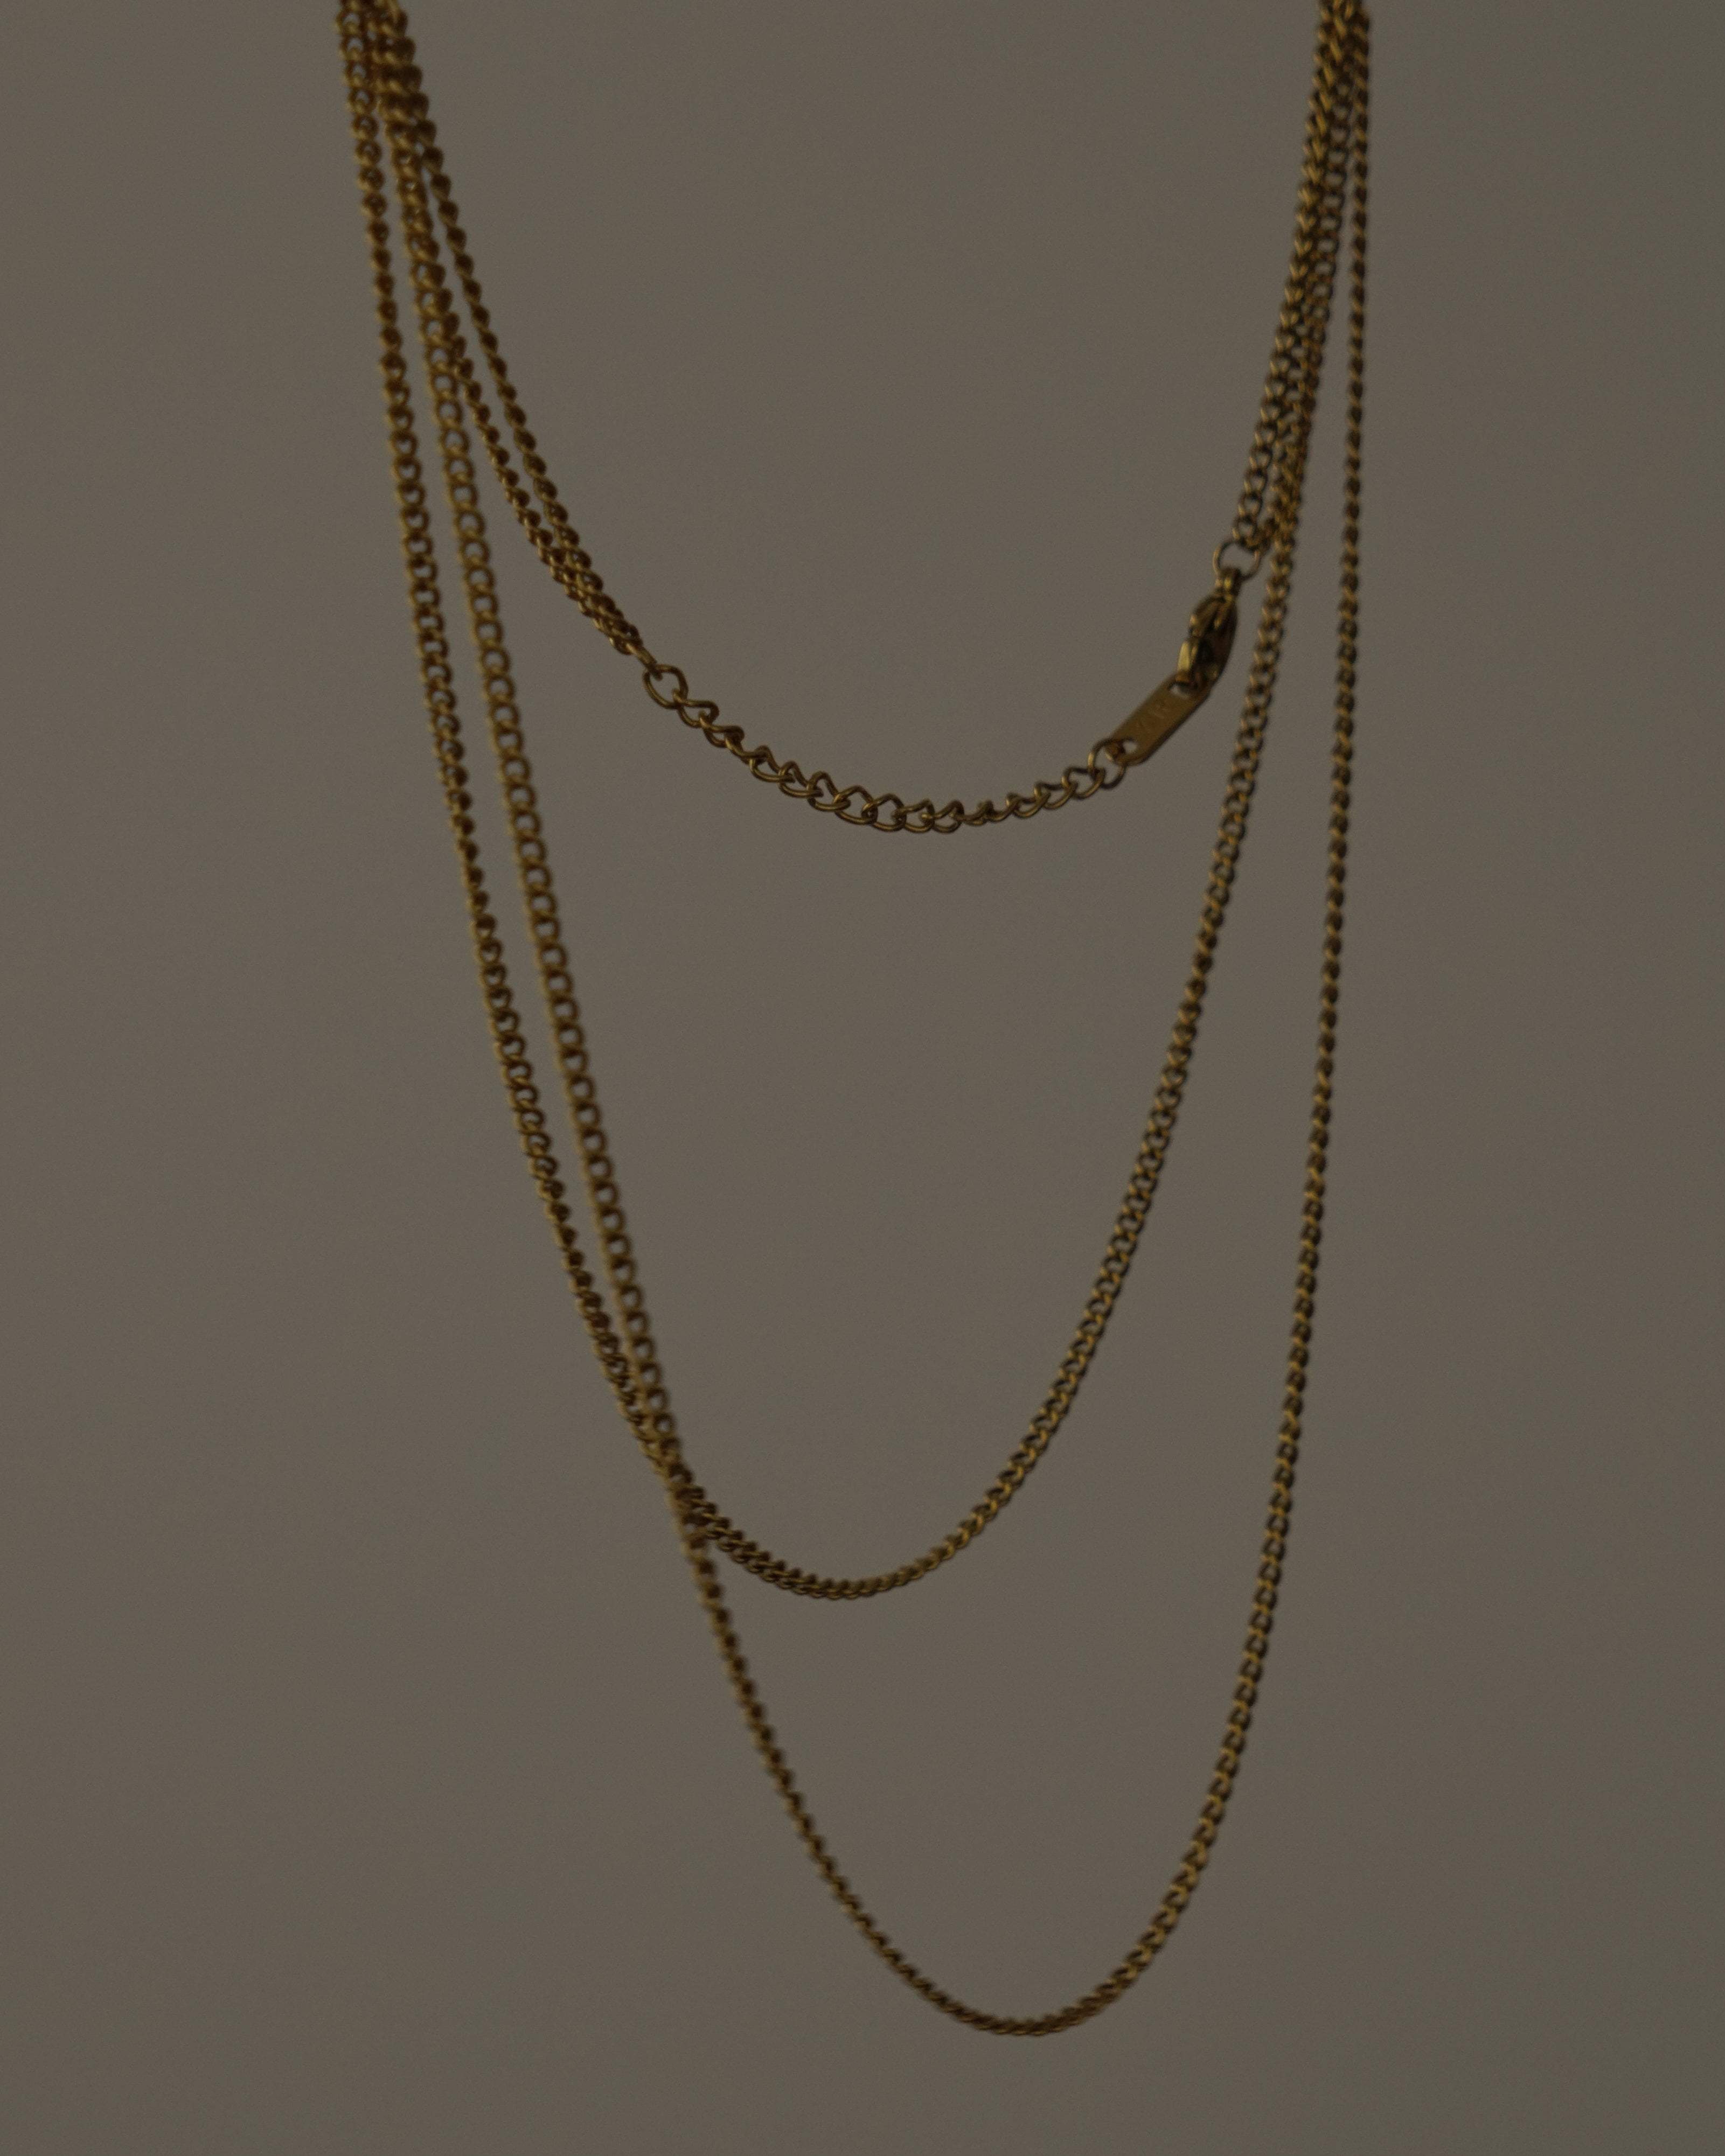 MYJN Necklaces 18K Gold Stainless Steel Layered Curb Chain Necklace